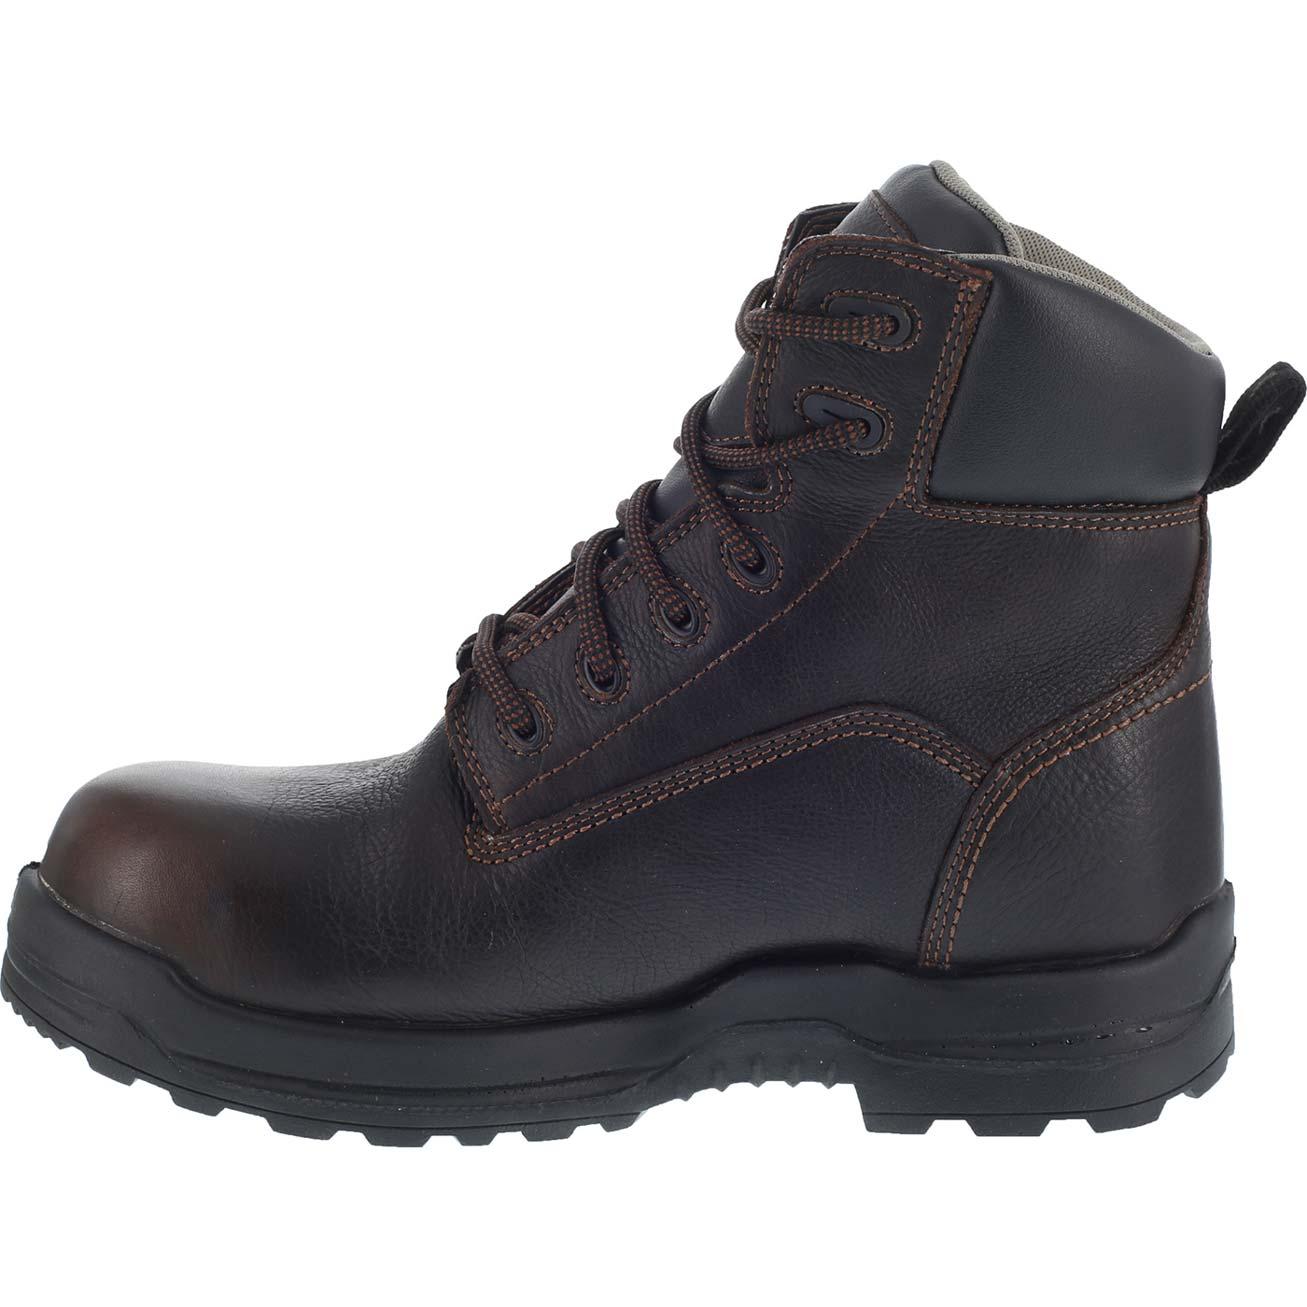 Rockport Works More Energy Composite Toe Static-Dissipative Work Boot ...